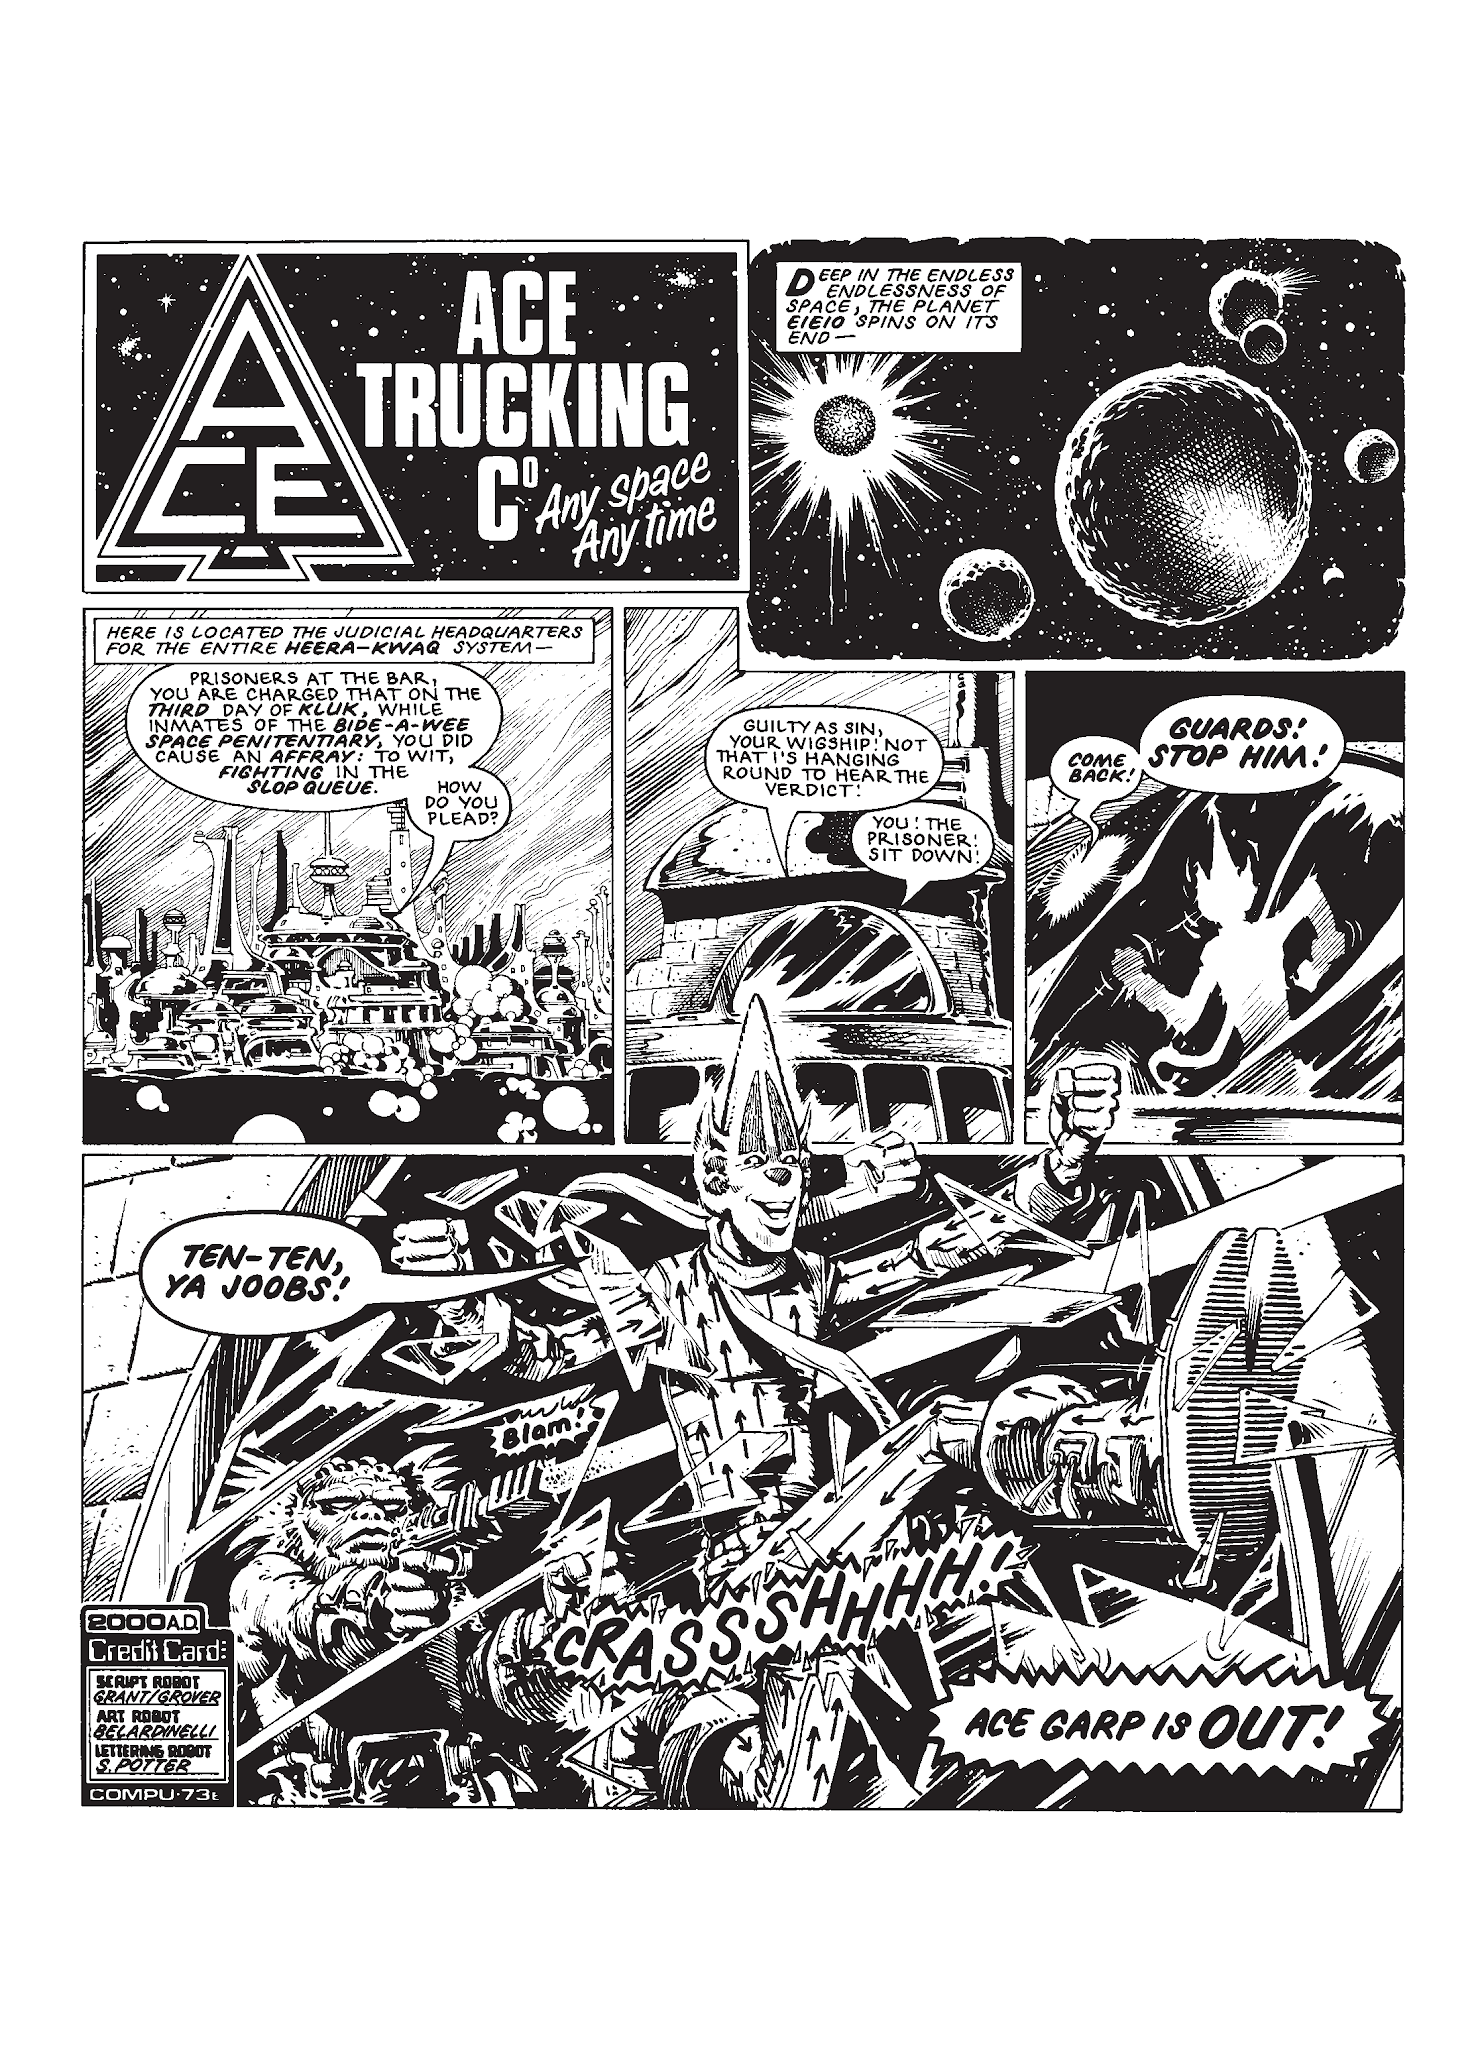 Read online The Complete Ace Trucking Co. comic -  Issue # TPB 2 - 5